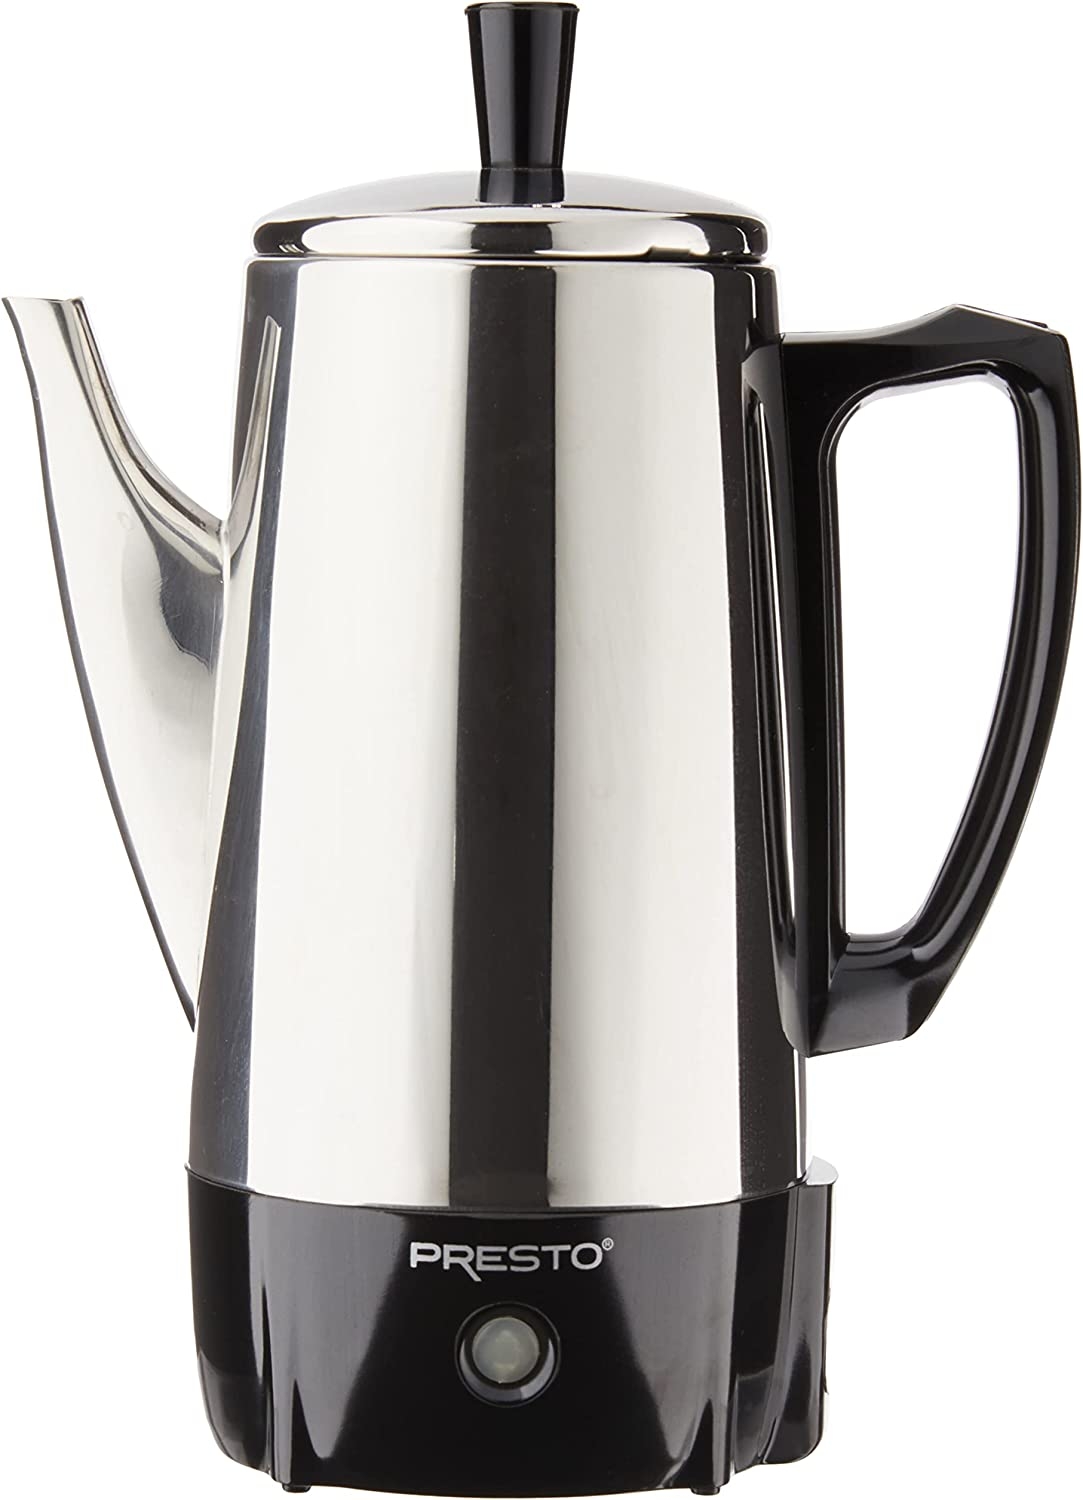 Presto 02822 6-Cup Stainless-Steel Coffee Percolator Import To Shop ×Product customization General Description Gallery Reviews